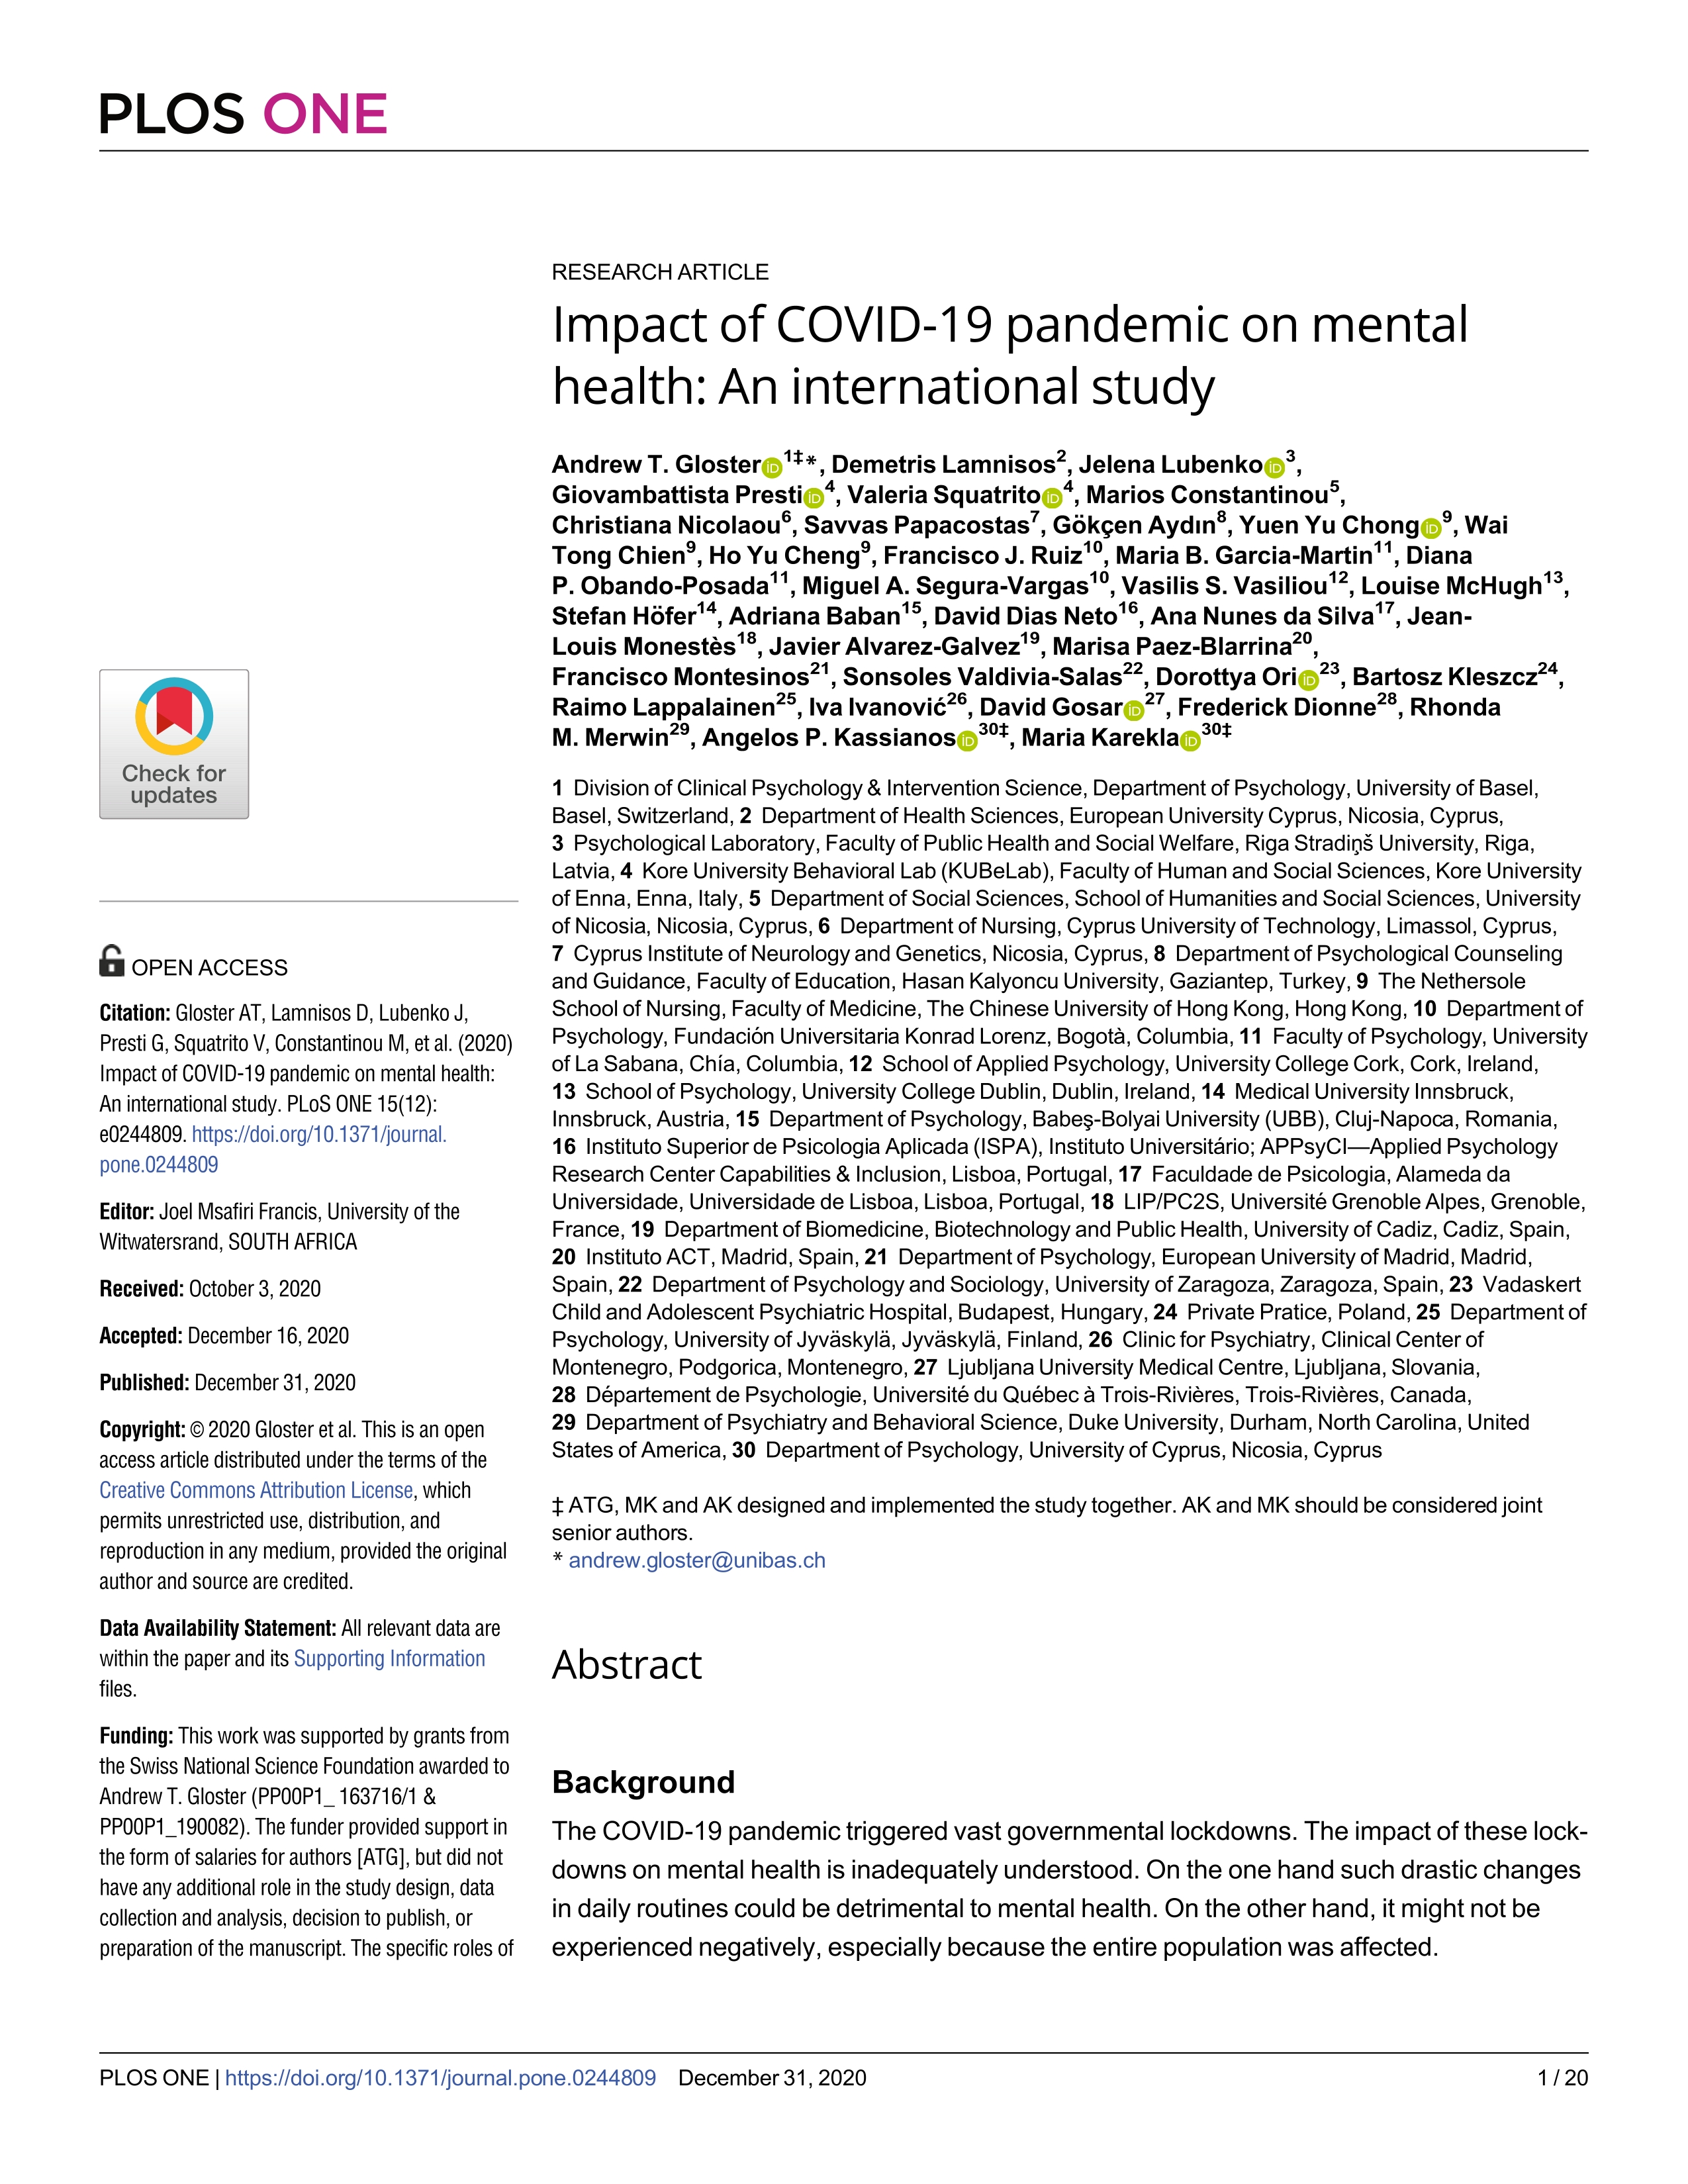 Impact Of Covid 19 Pandemic On Mental Health An International Study